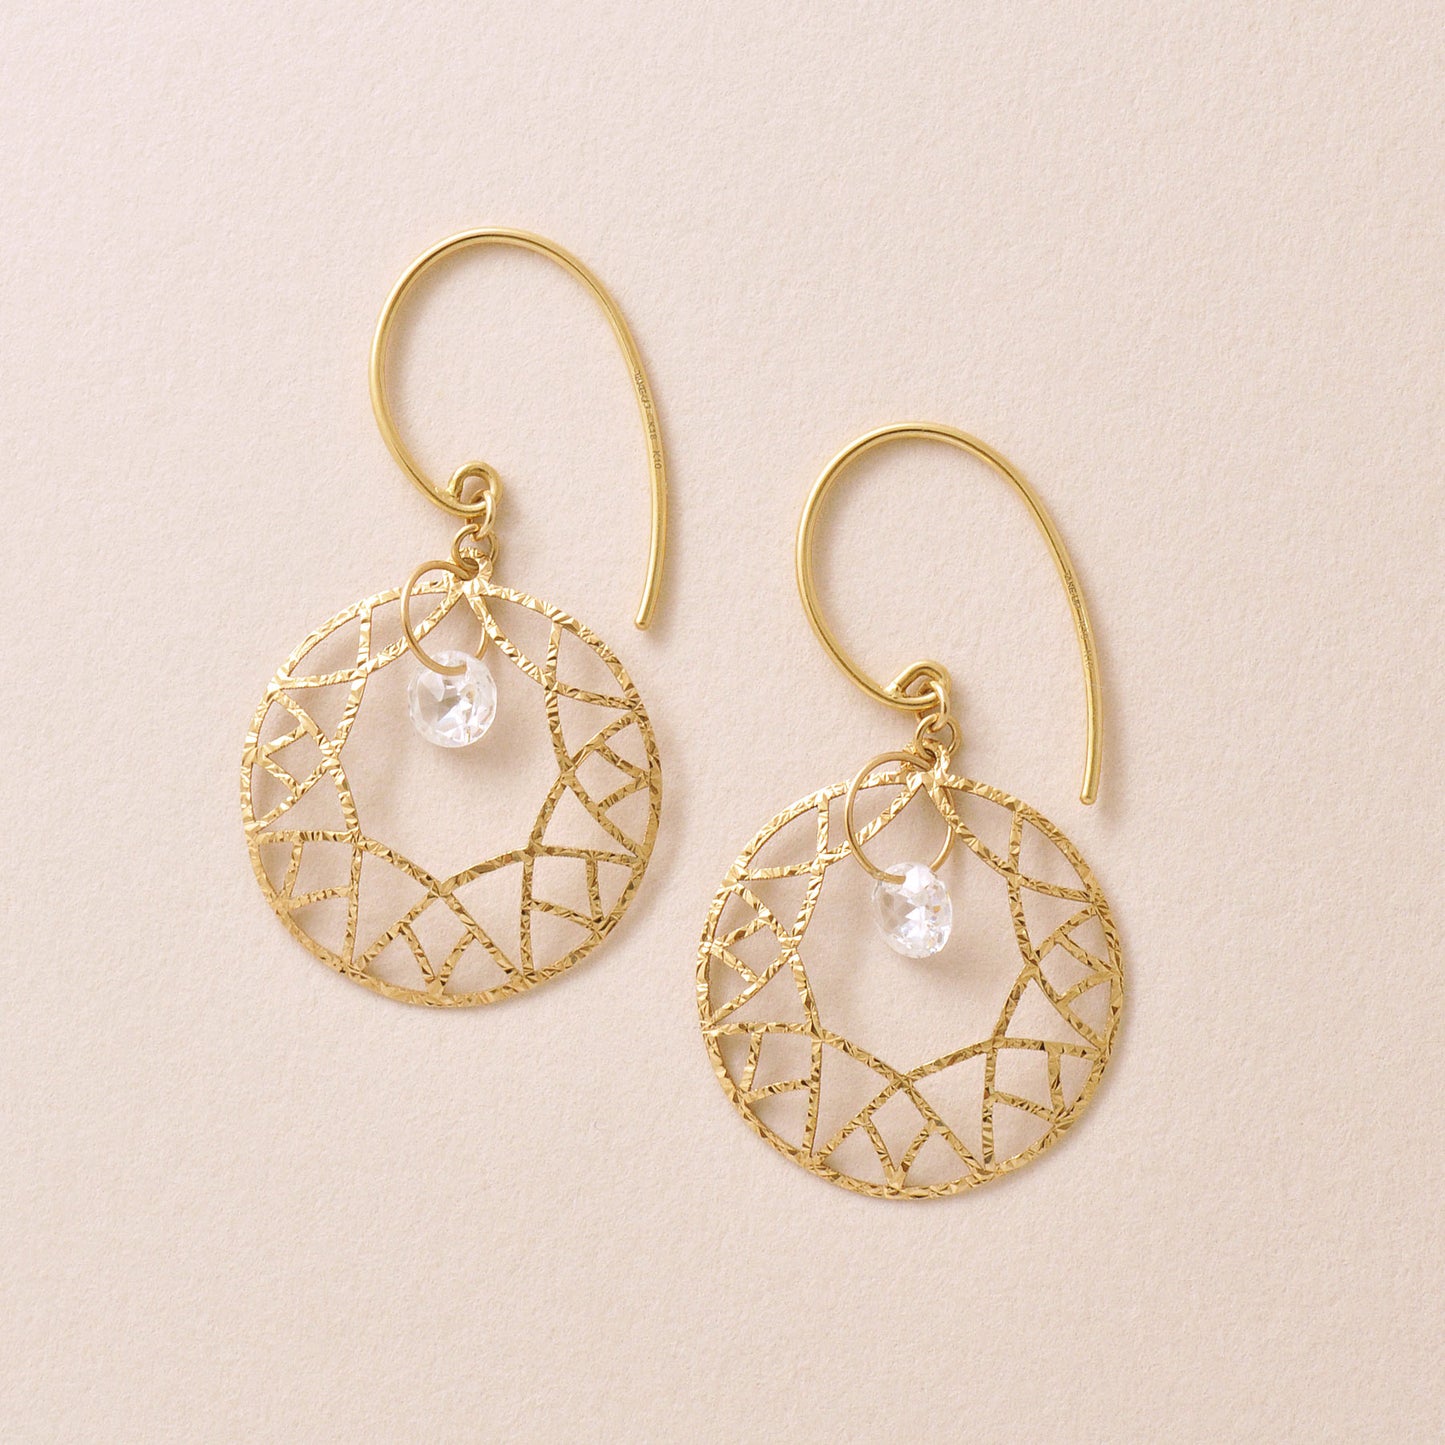 18K/10K Open Work Circle Earrings (Yellow Gold) - Product Image